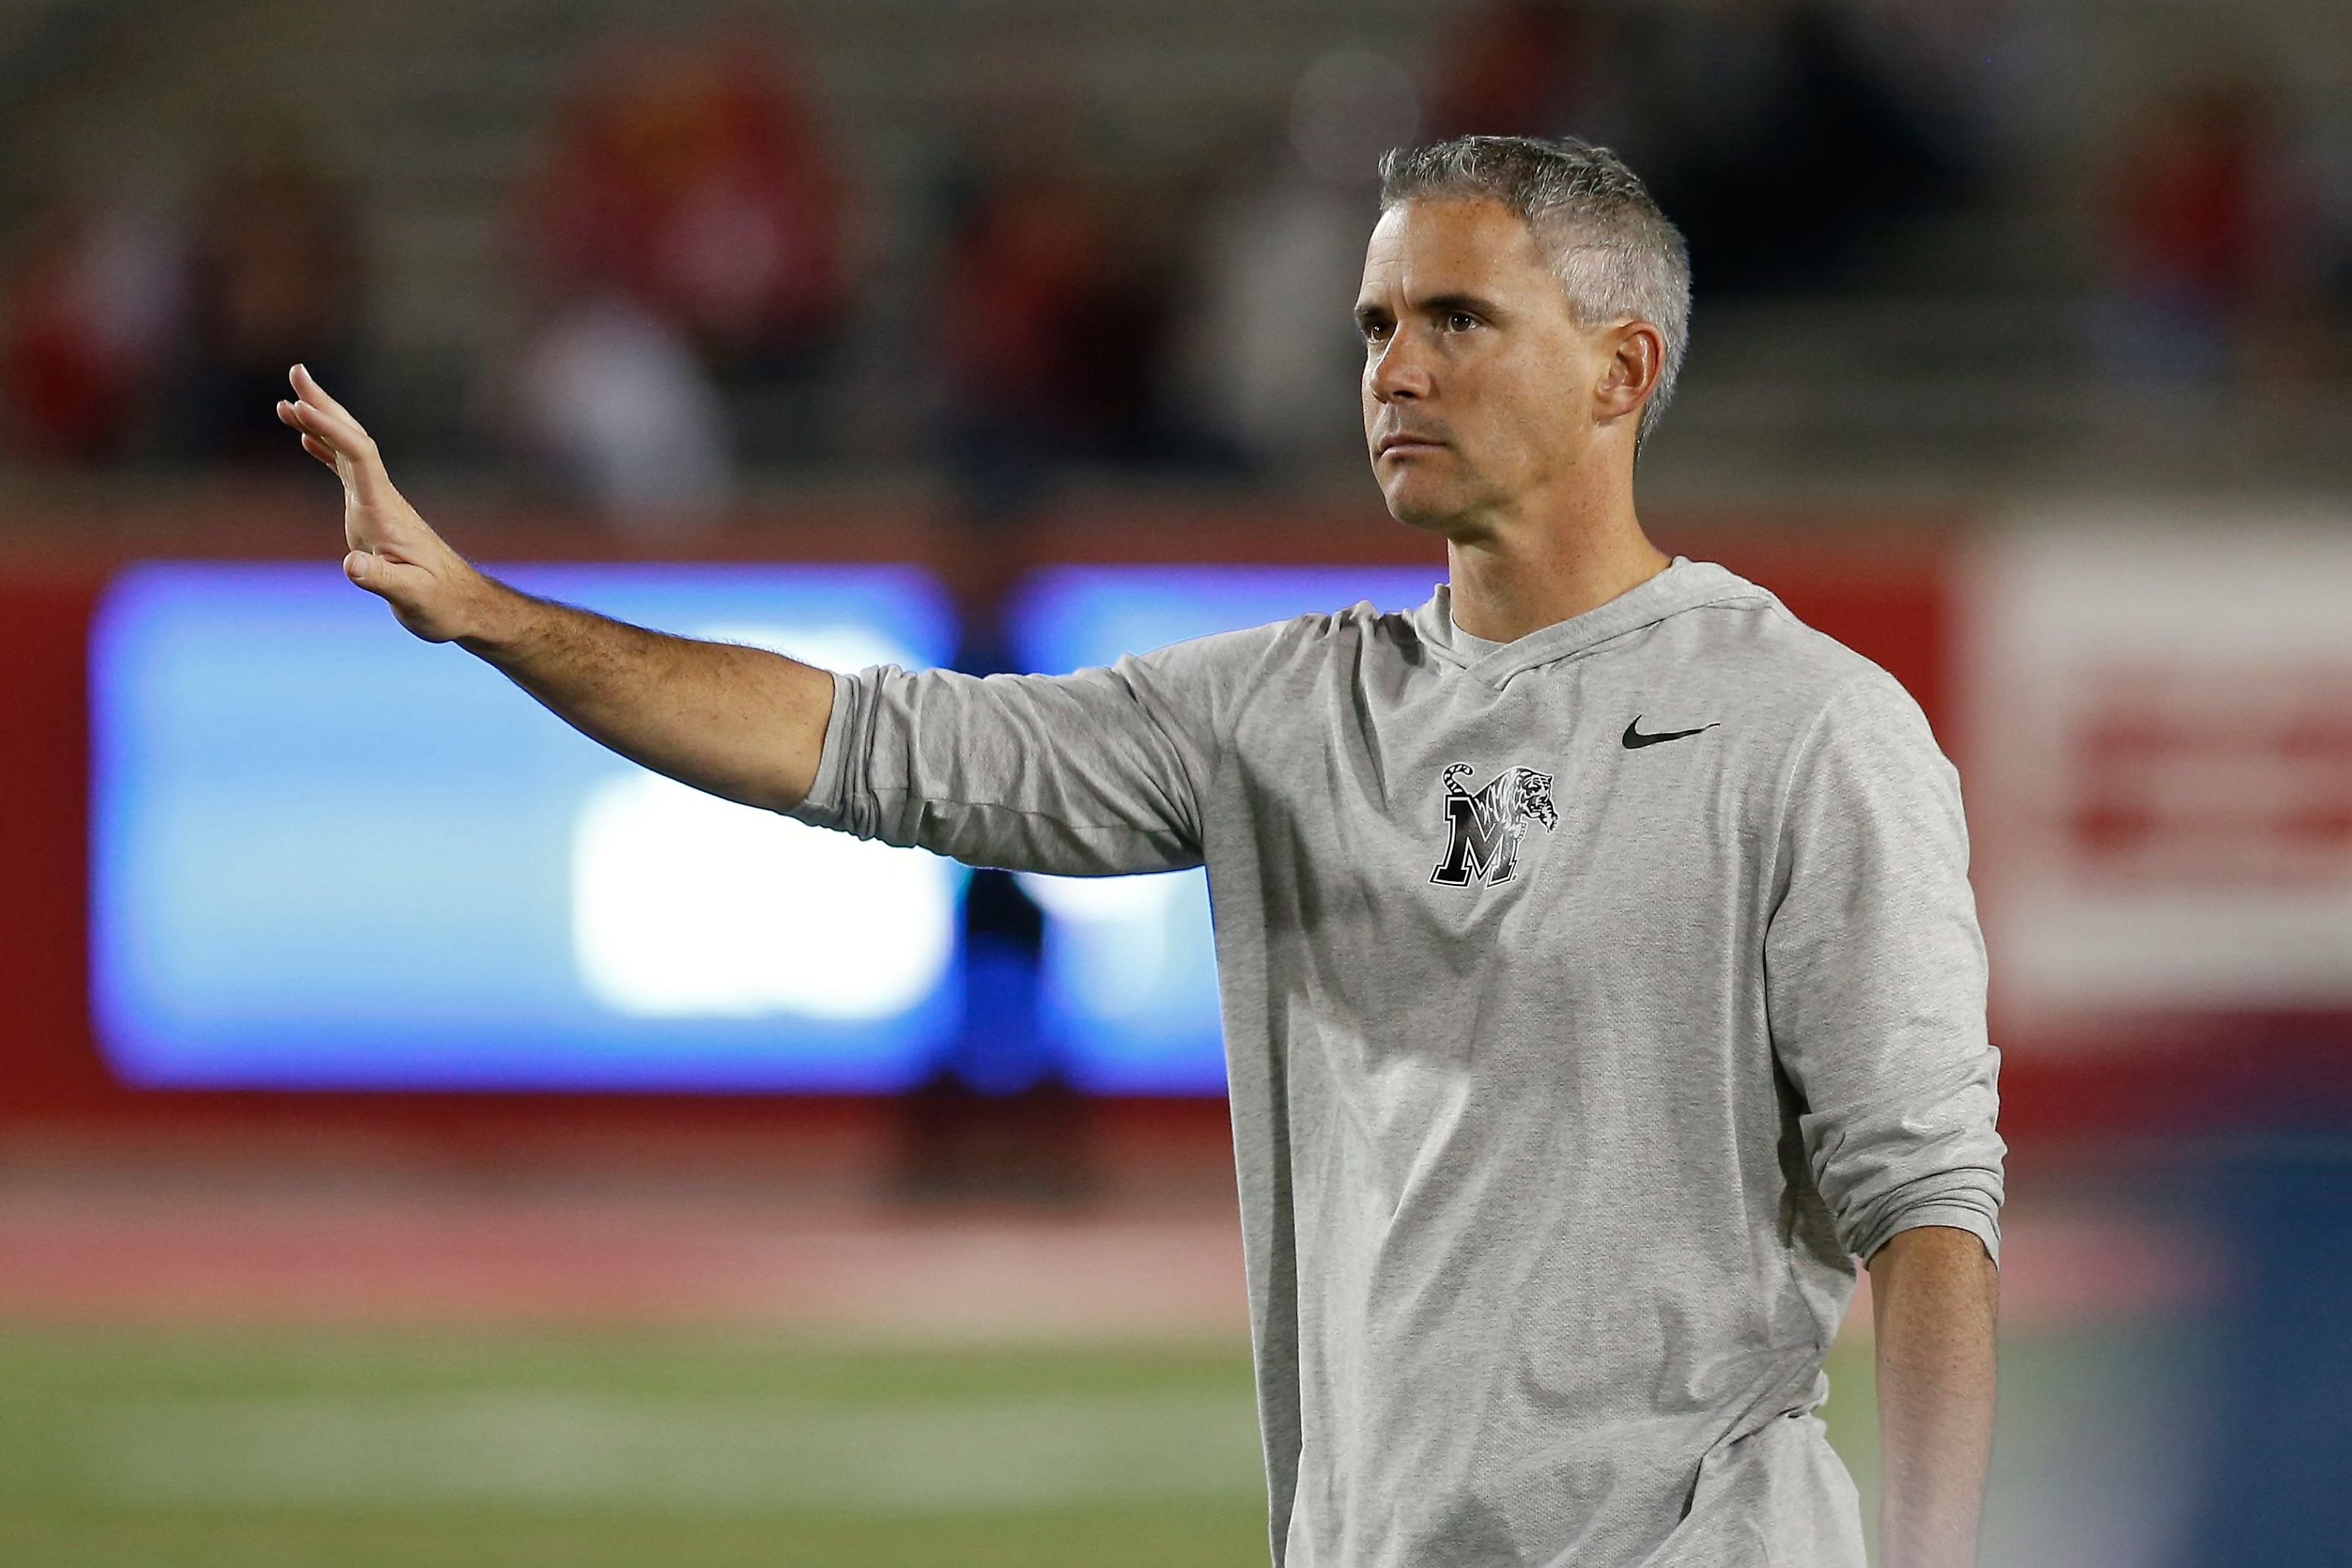 FSU football: 3 things Mike Norvell can learn from UNC's Mack Brown